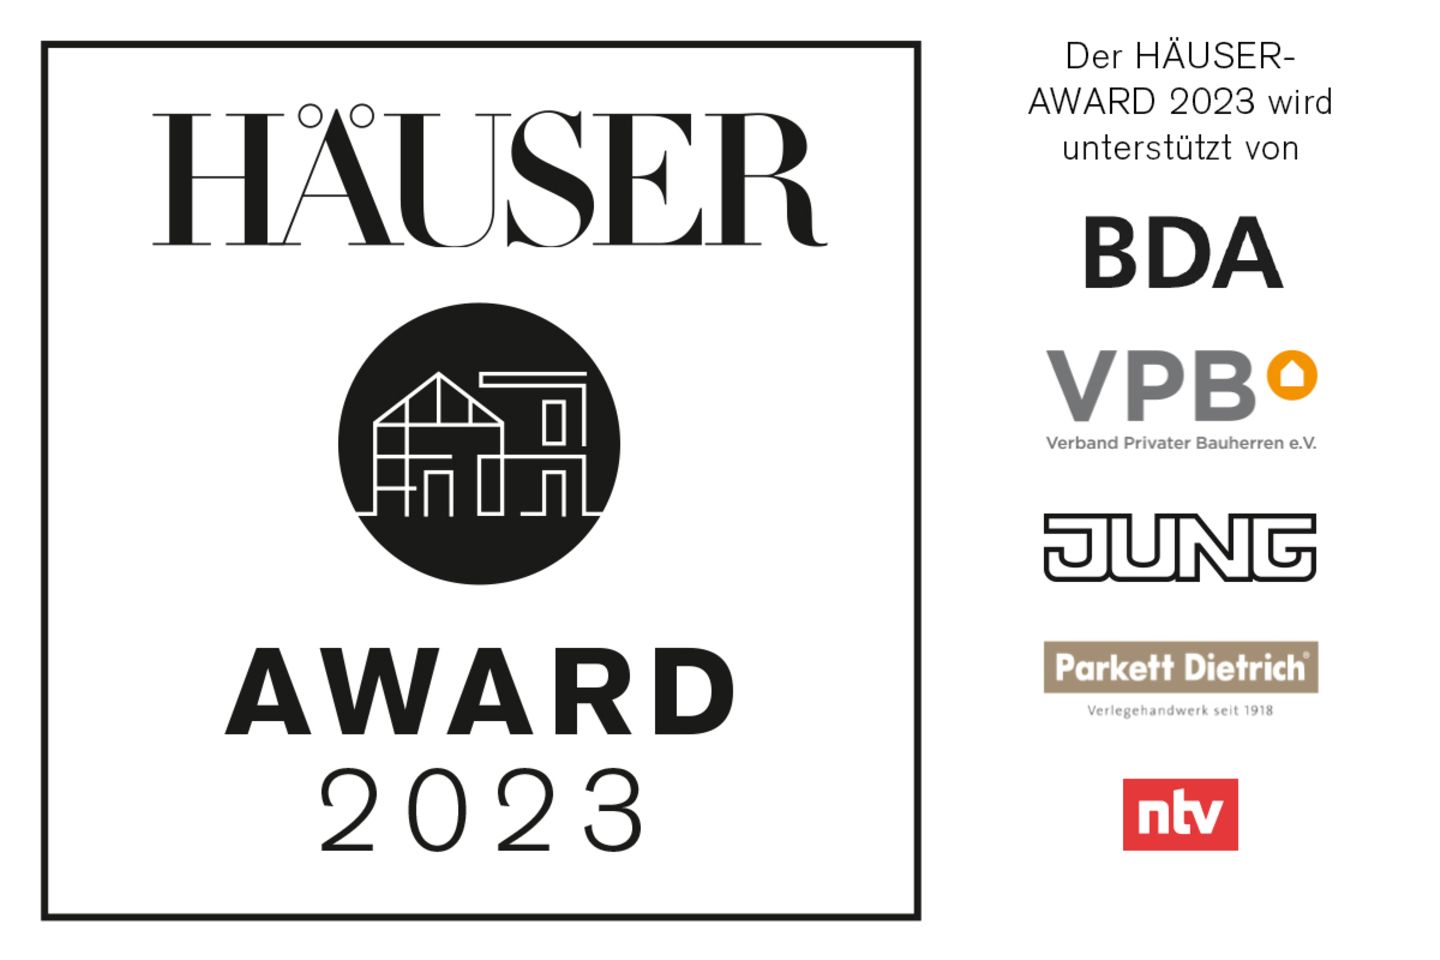 HÄUSER AWARD 2023: 15,000 euros for the best individual houses